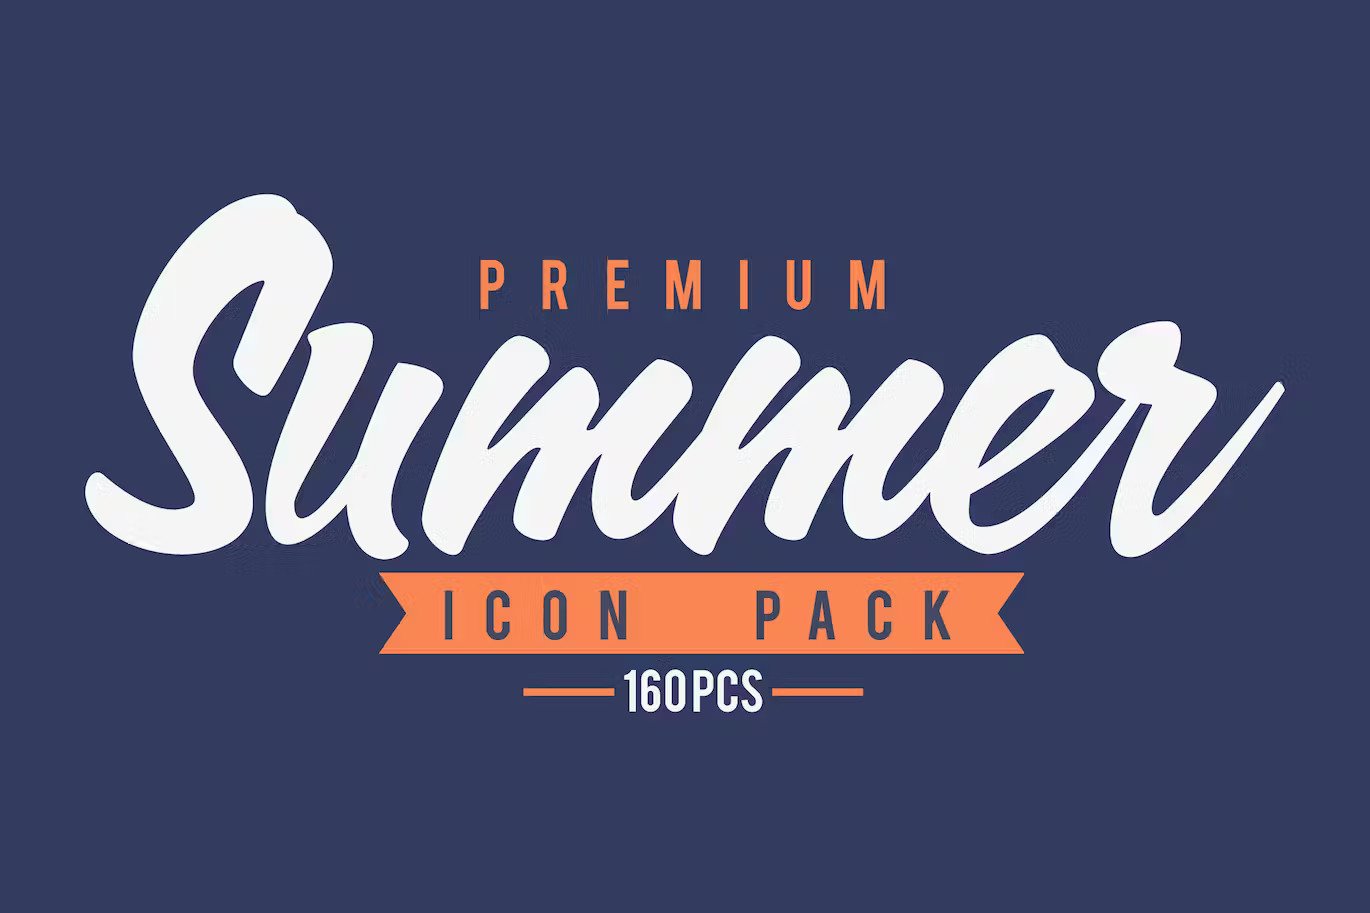 A summer icon pack